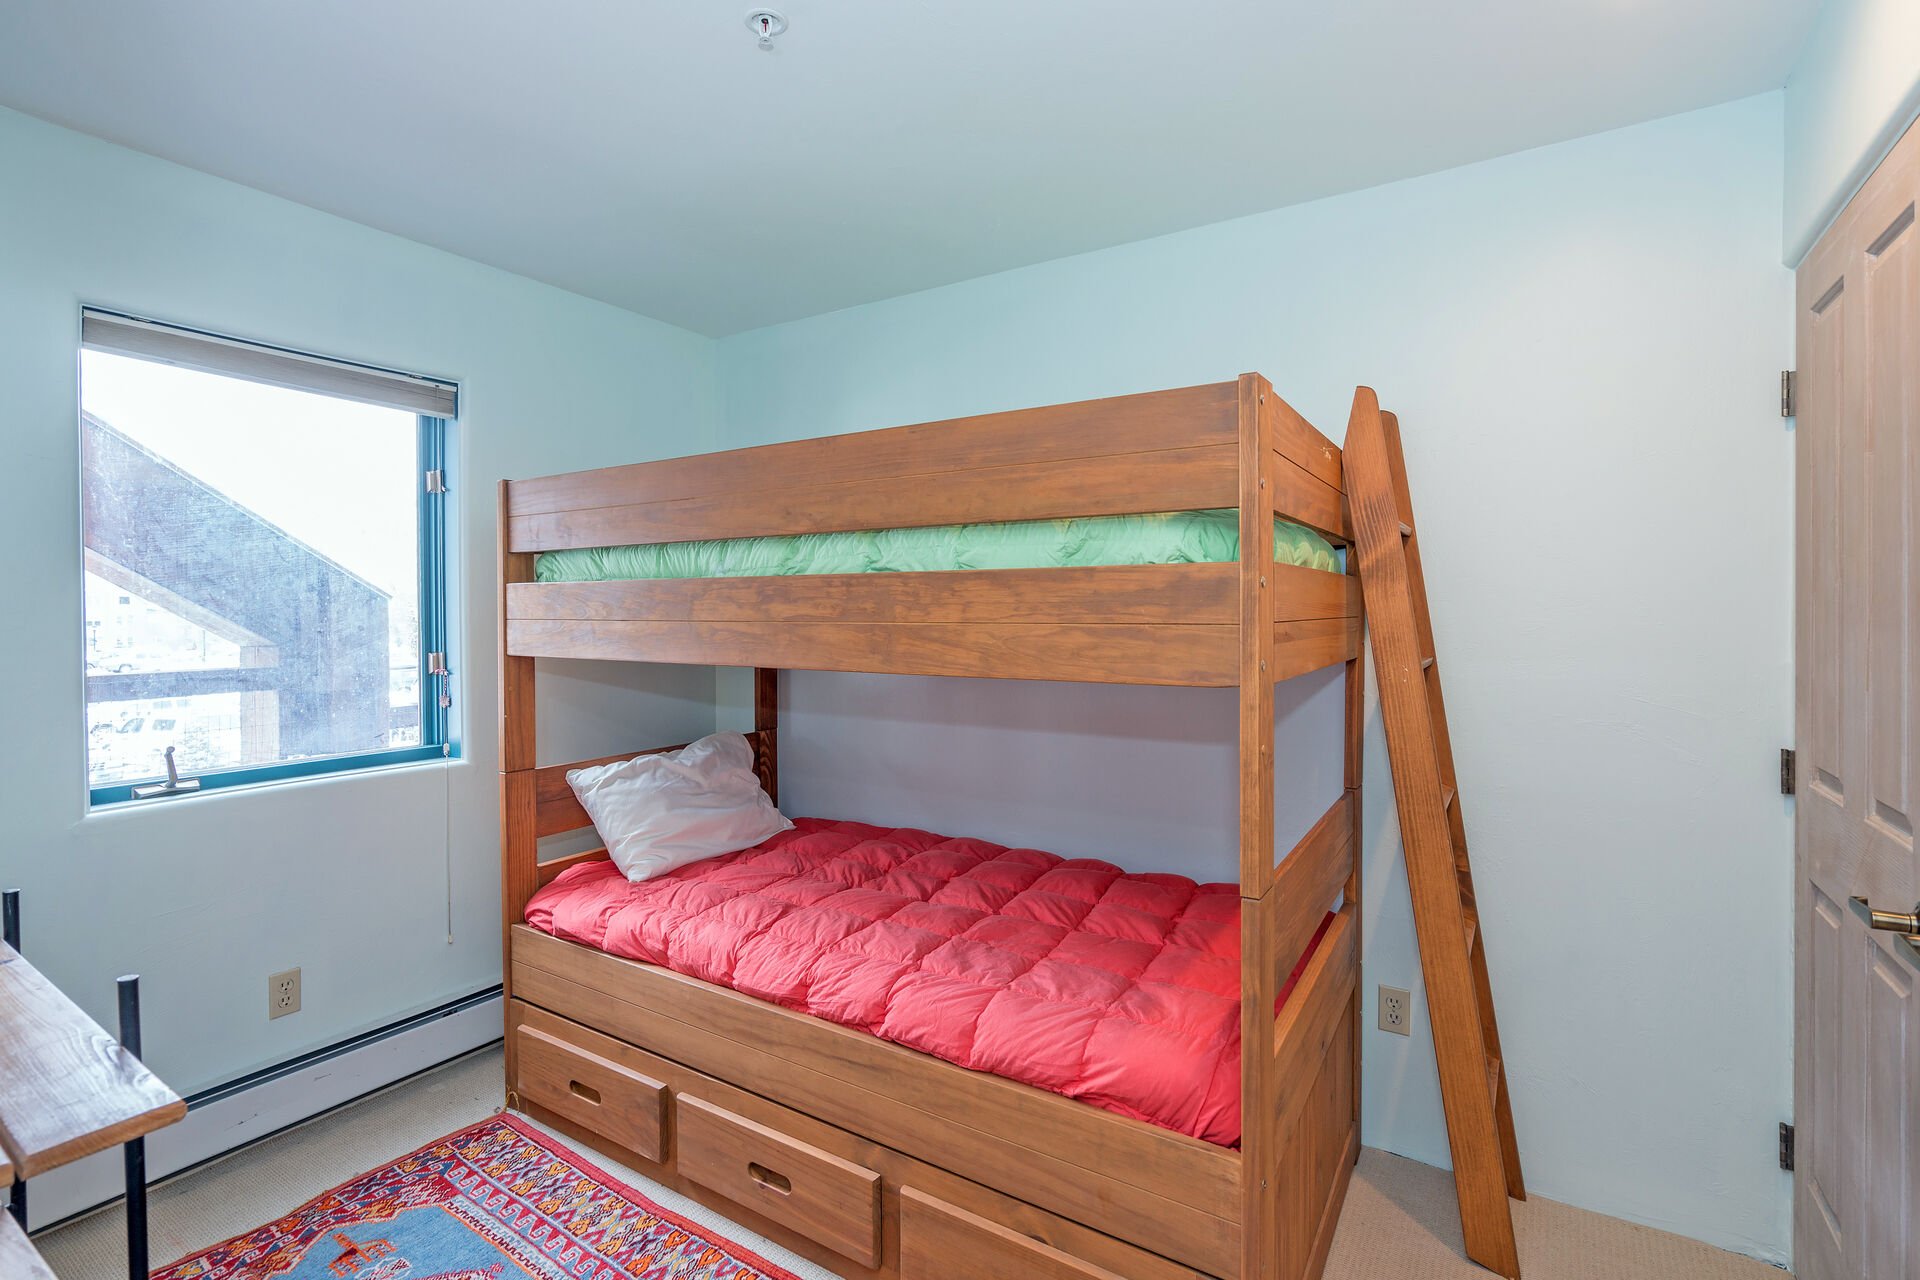 The 3rd bedroom is for the kids! A twin bunkbed with underneath storage for any toys you bring